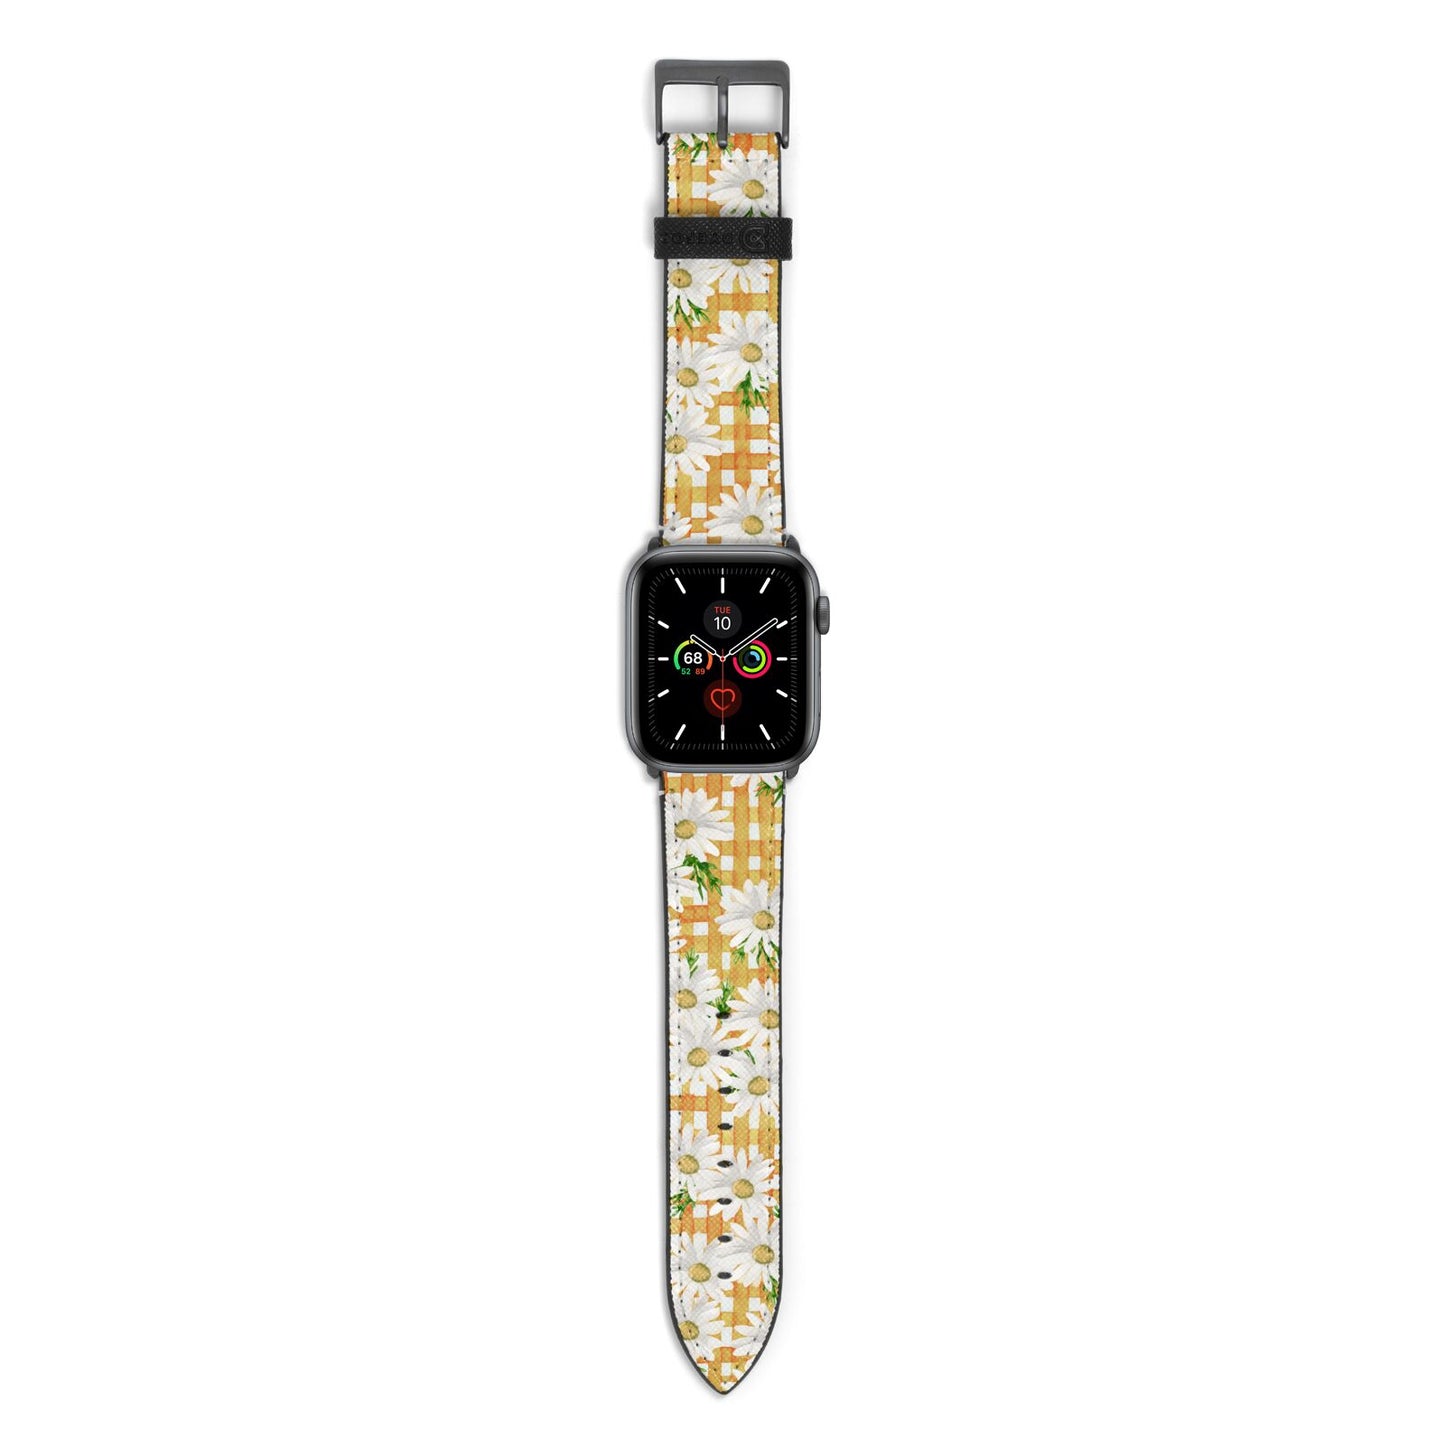 Checkered Daisy Apple Watch Strap with Space Grey Hardware